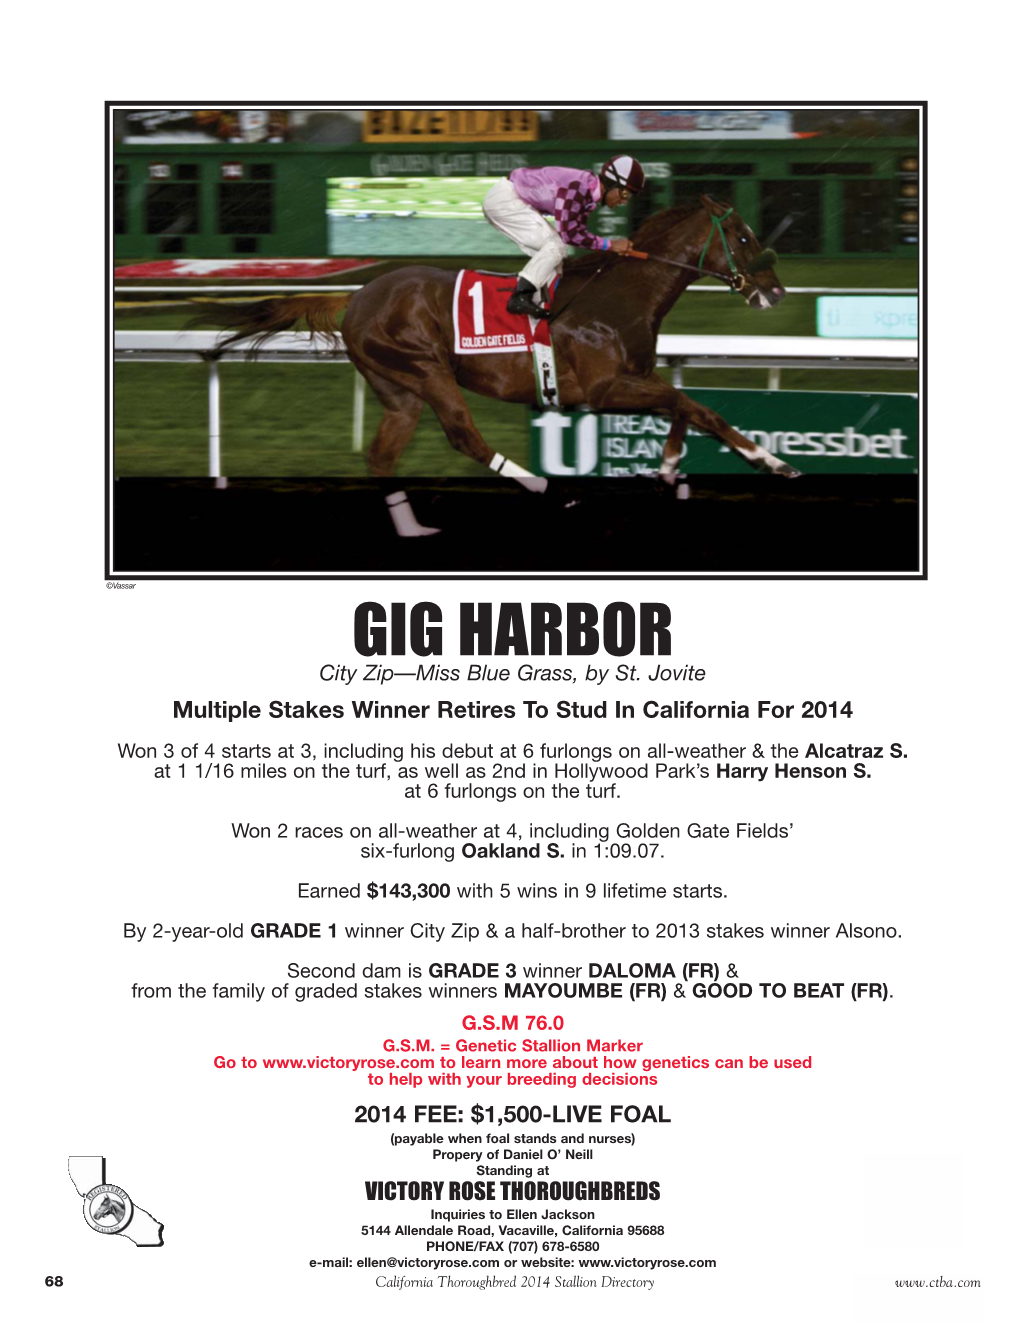 GIG HARBOR:Layout 1 12/2/13 8:55 AM Page 1